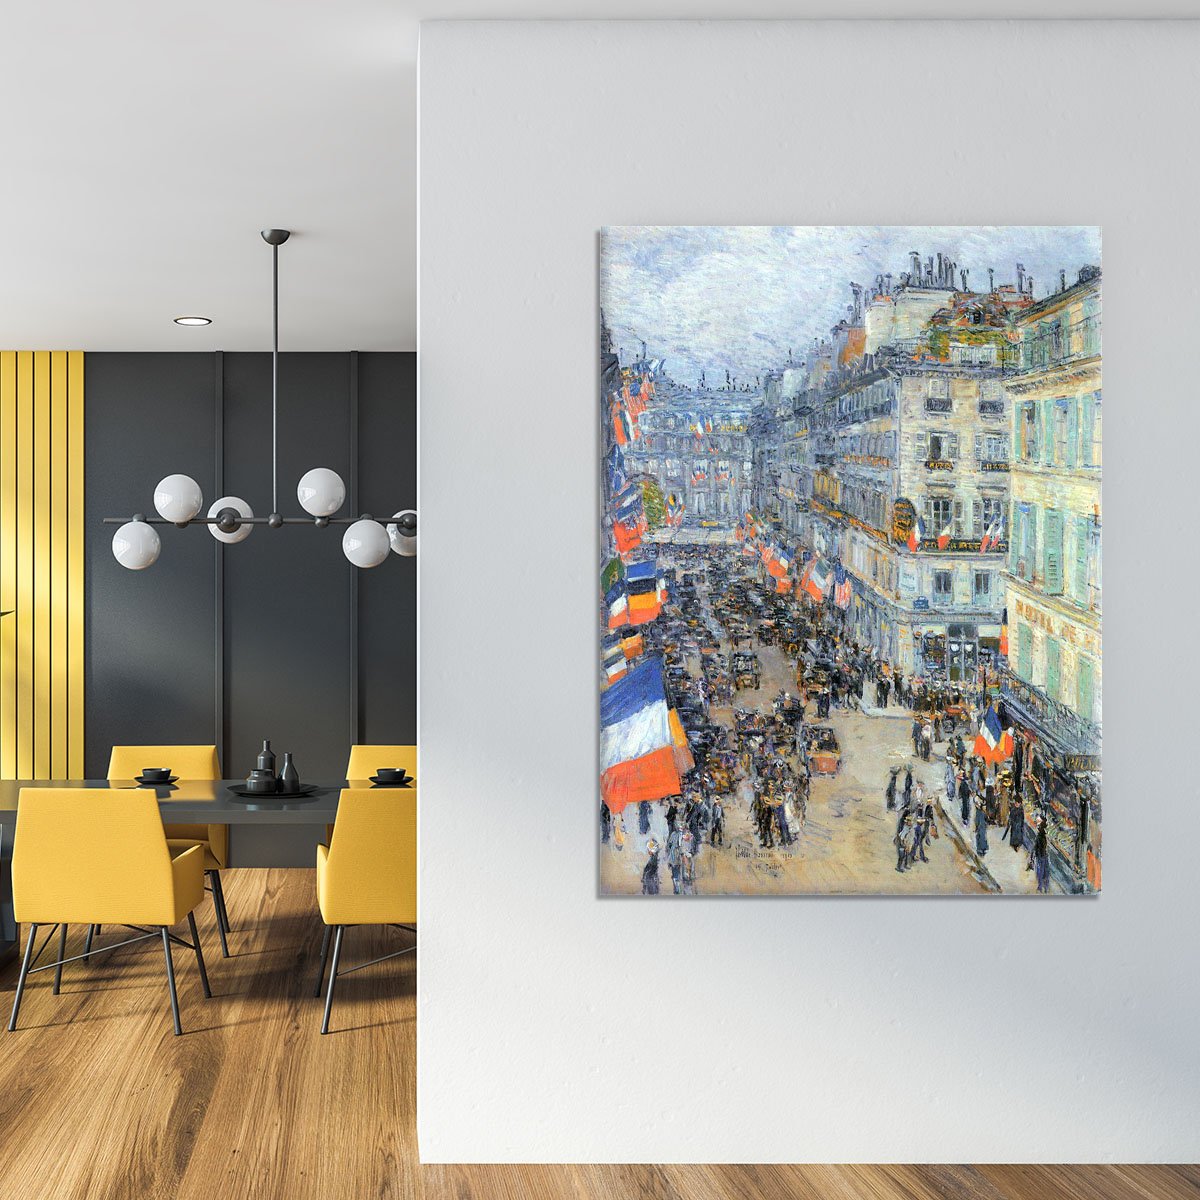 The 14th July Rue Daunou by Hassam Canvas Print or Poster